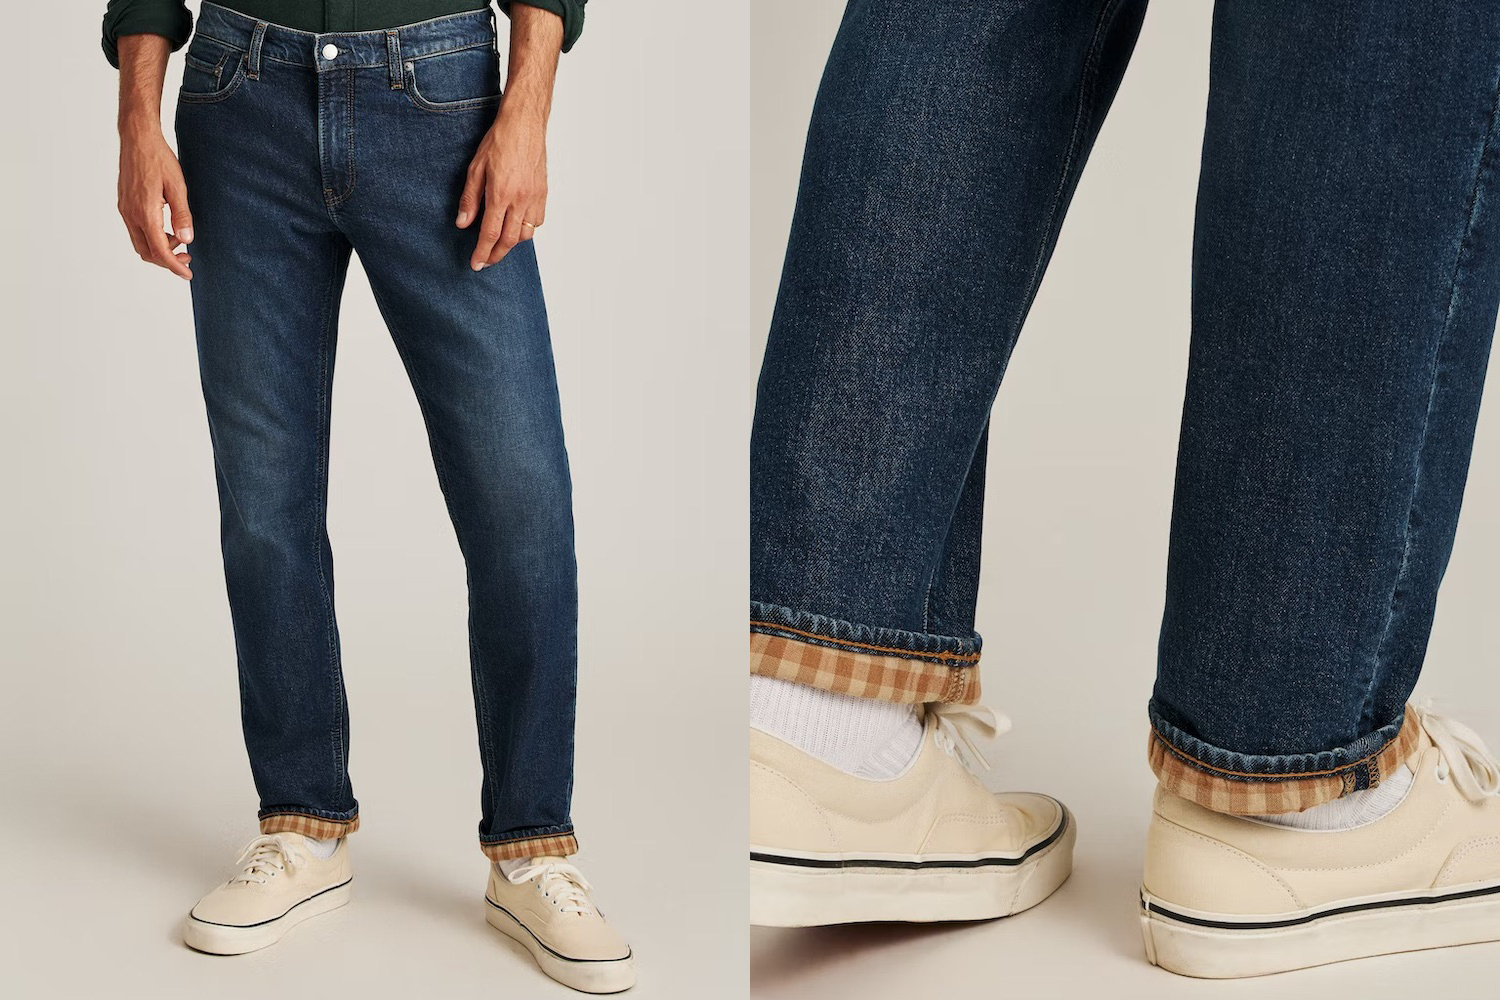 two photos of the Bonobos flannel lined jean on a cream background